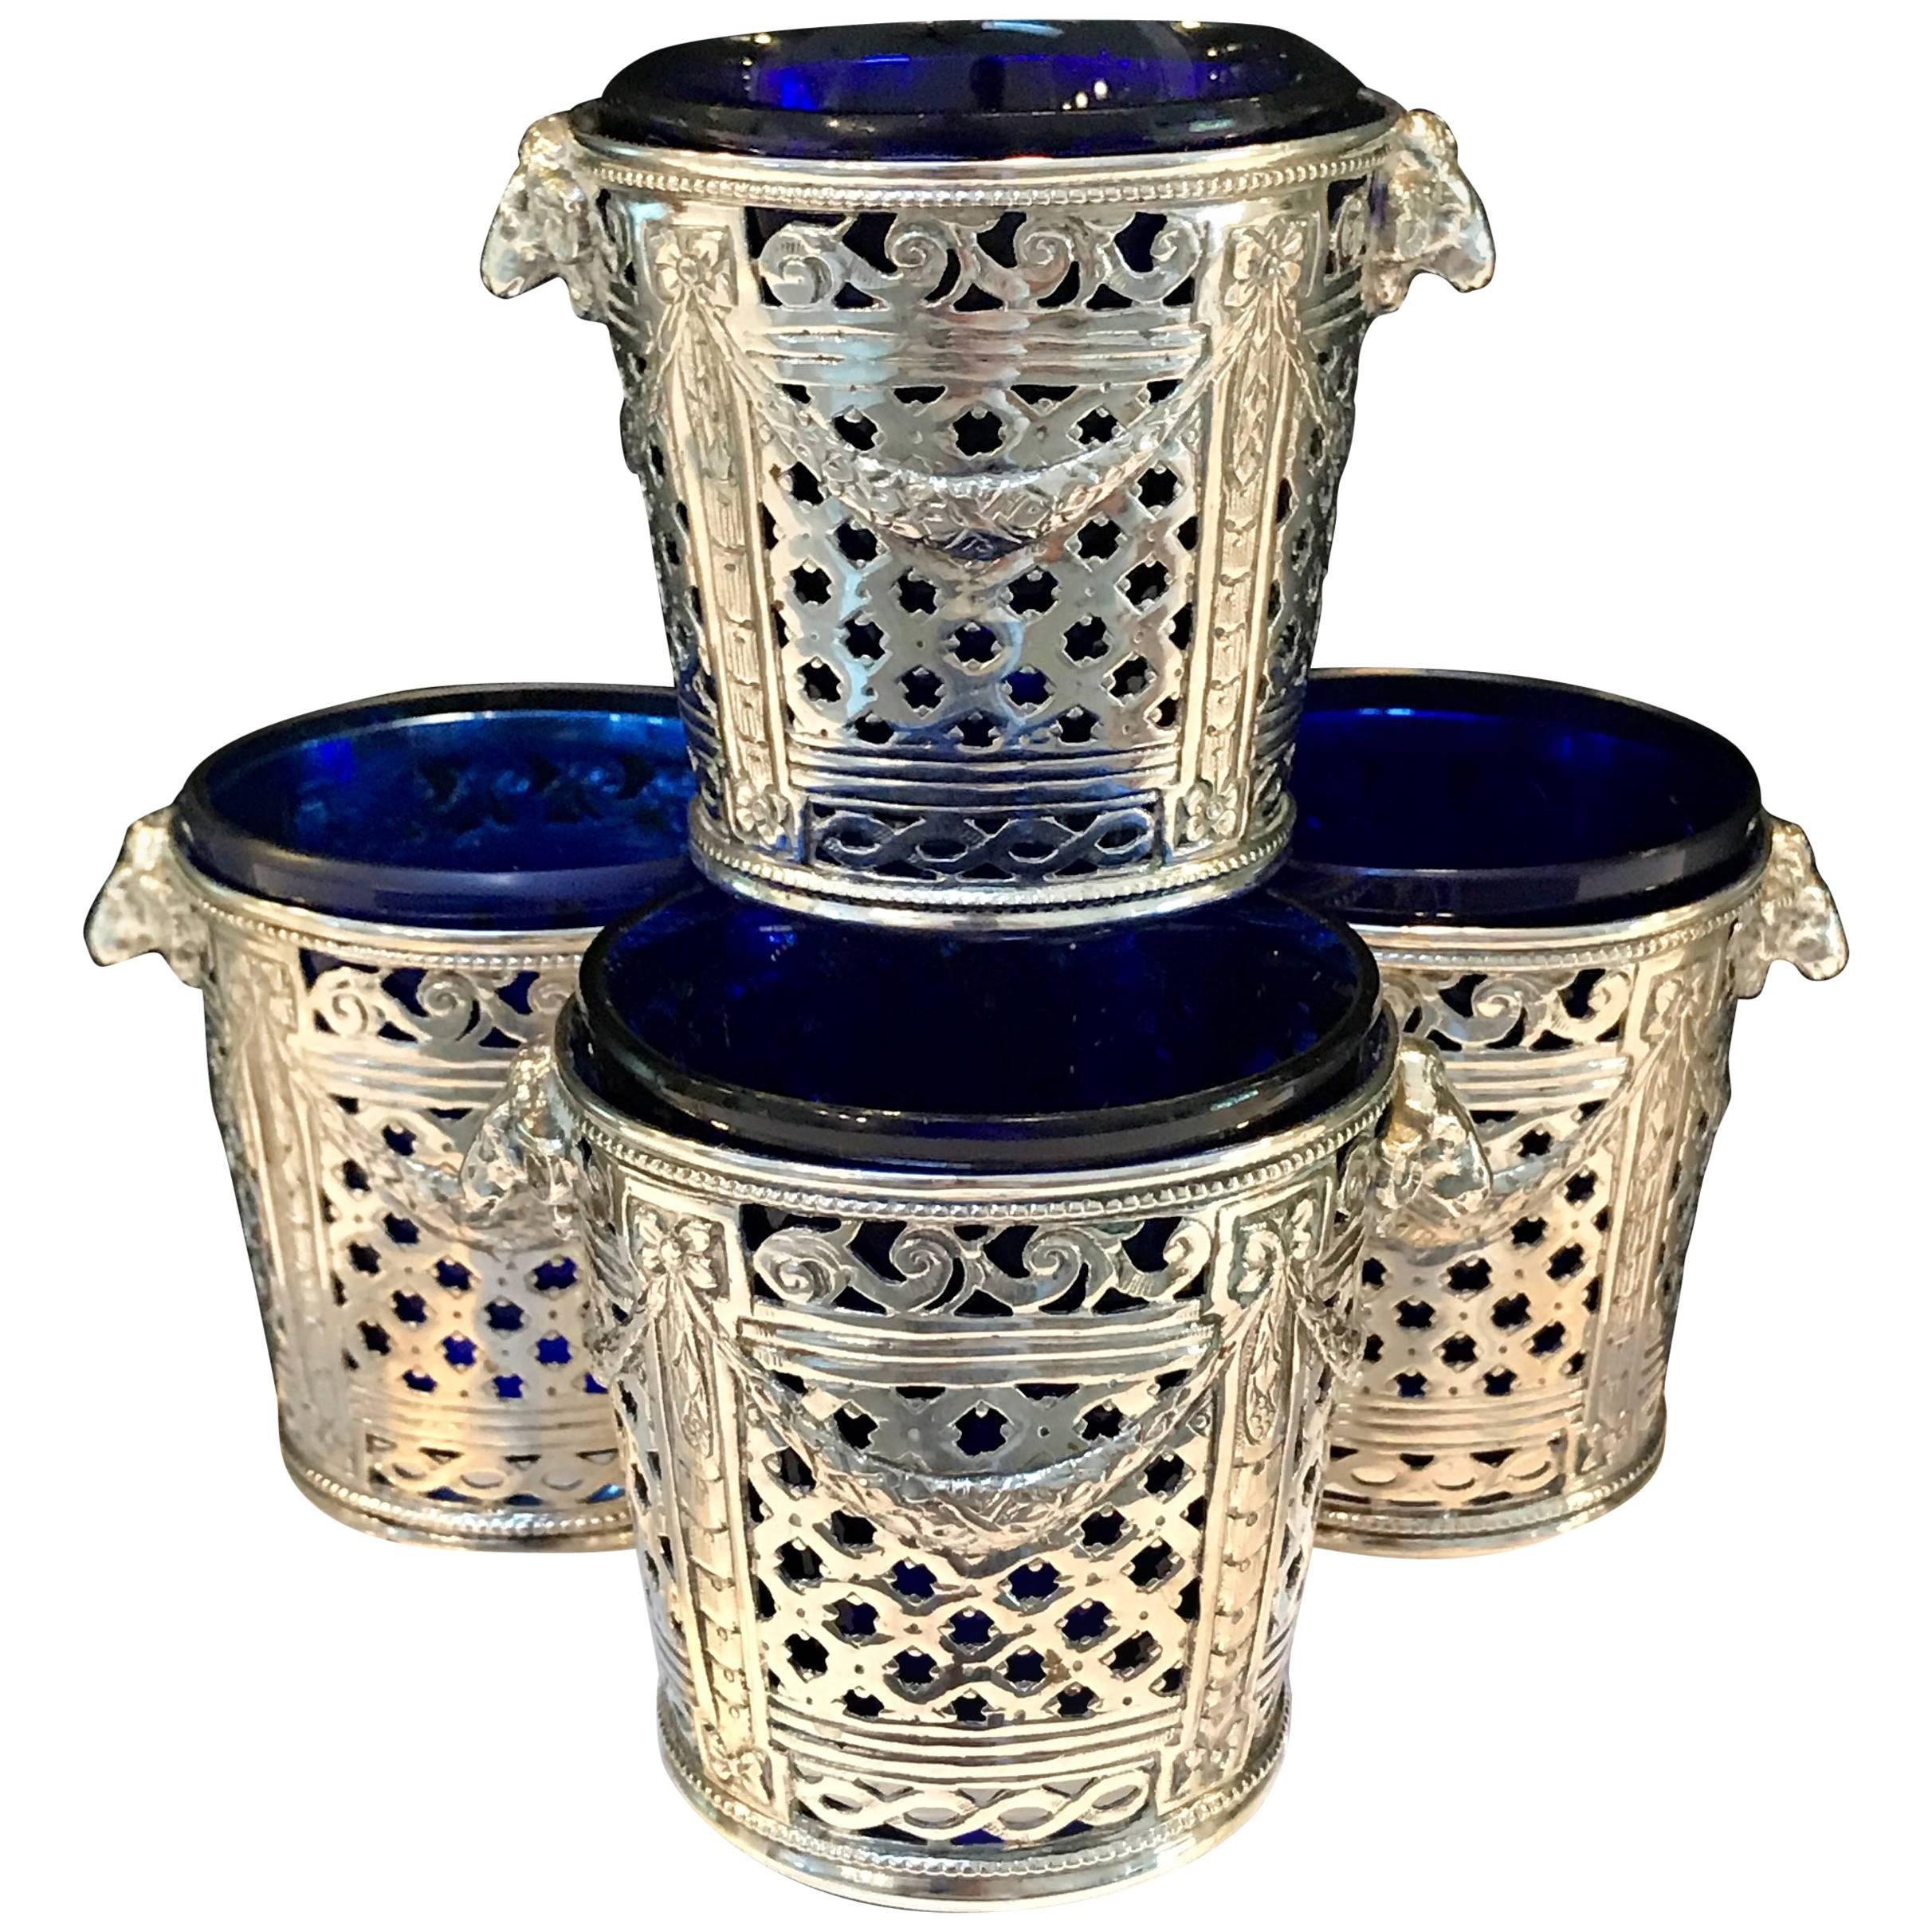 Four Silver Louis XVI Style Cachepots or Salts, with Cobalt Blue Glass Liners